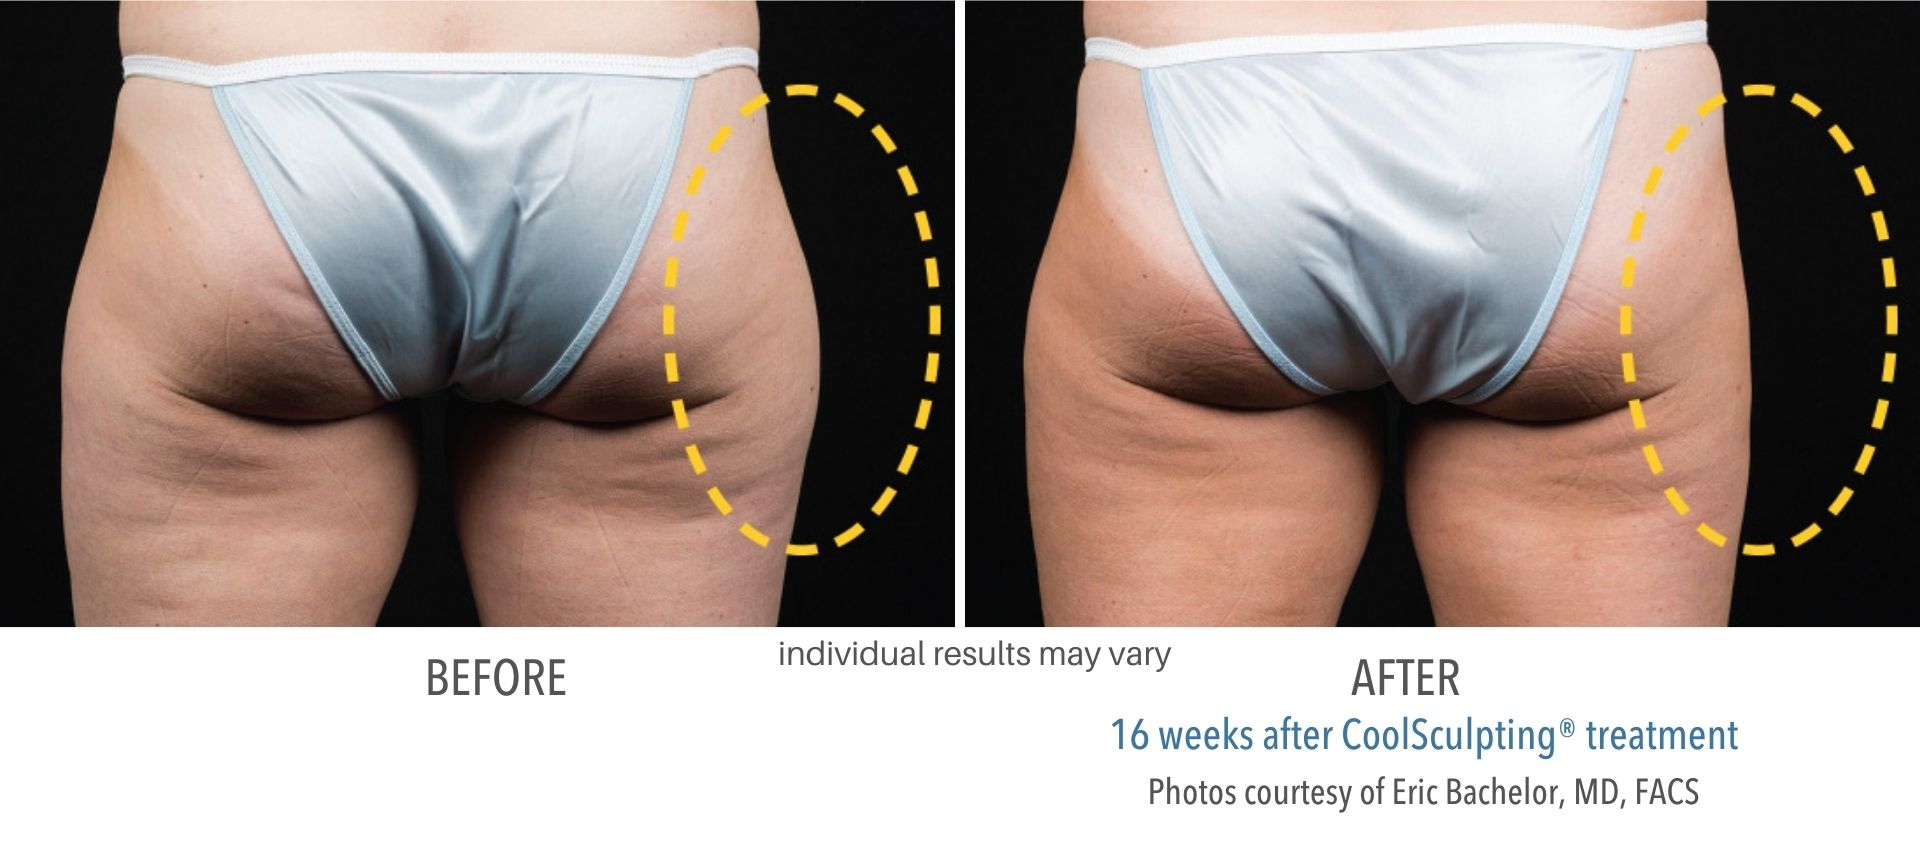 Thighs before and after coolsculpting treatment results.